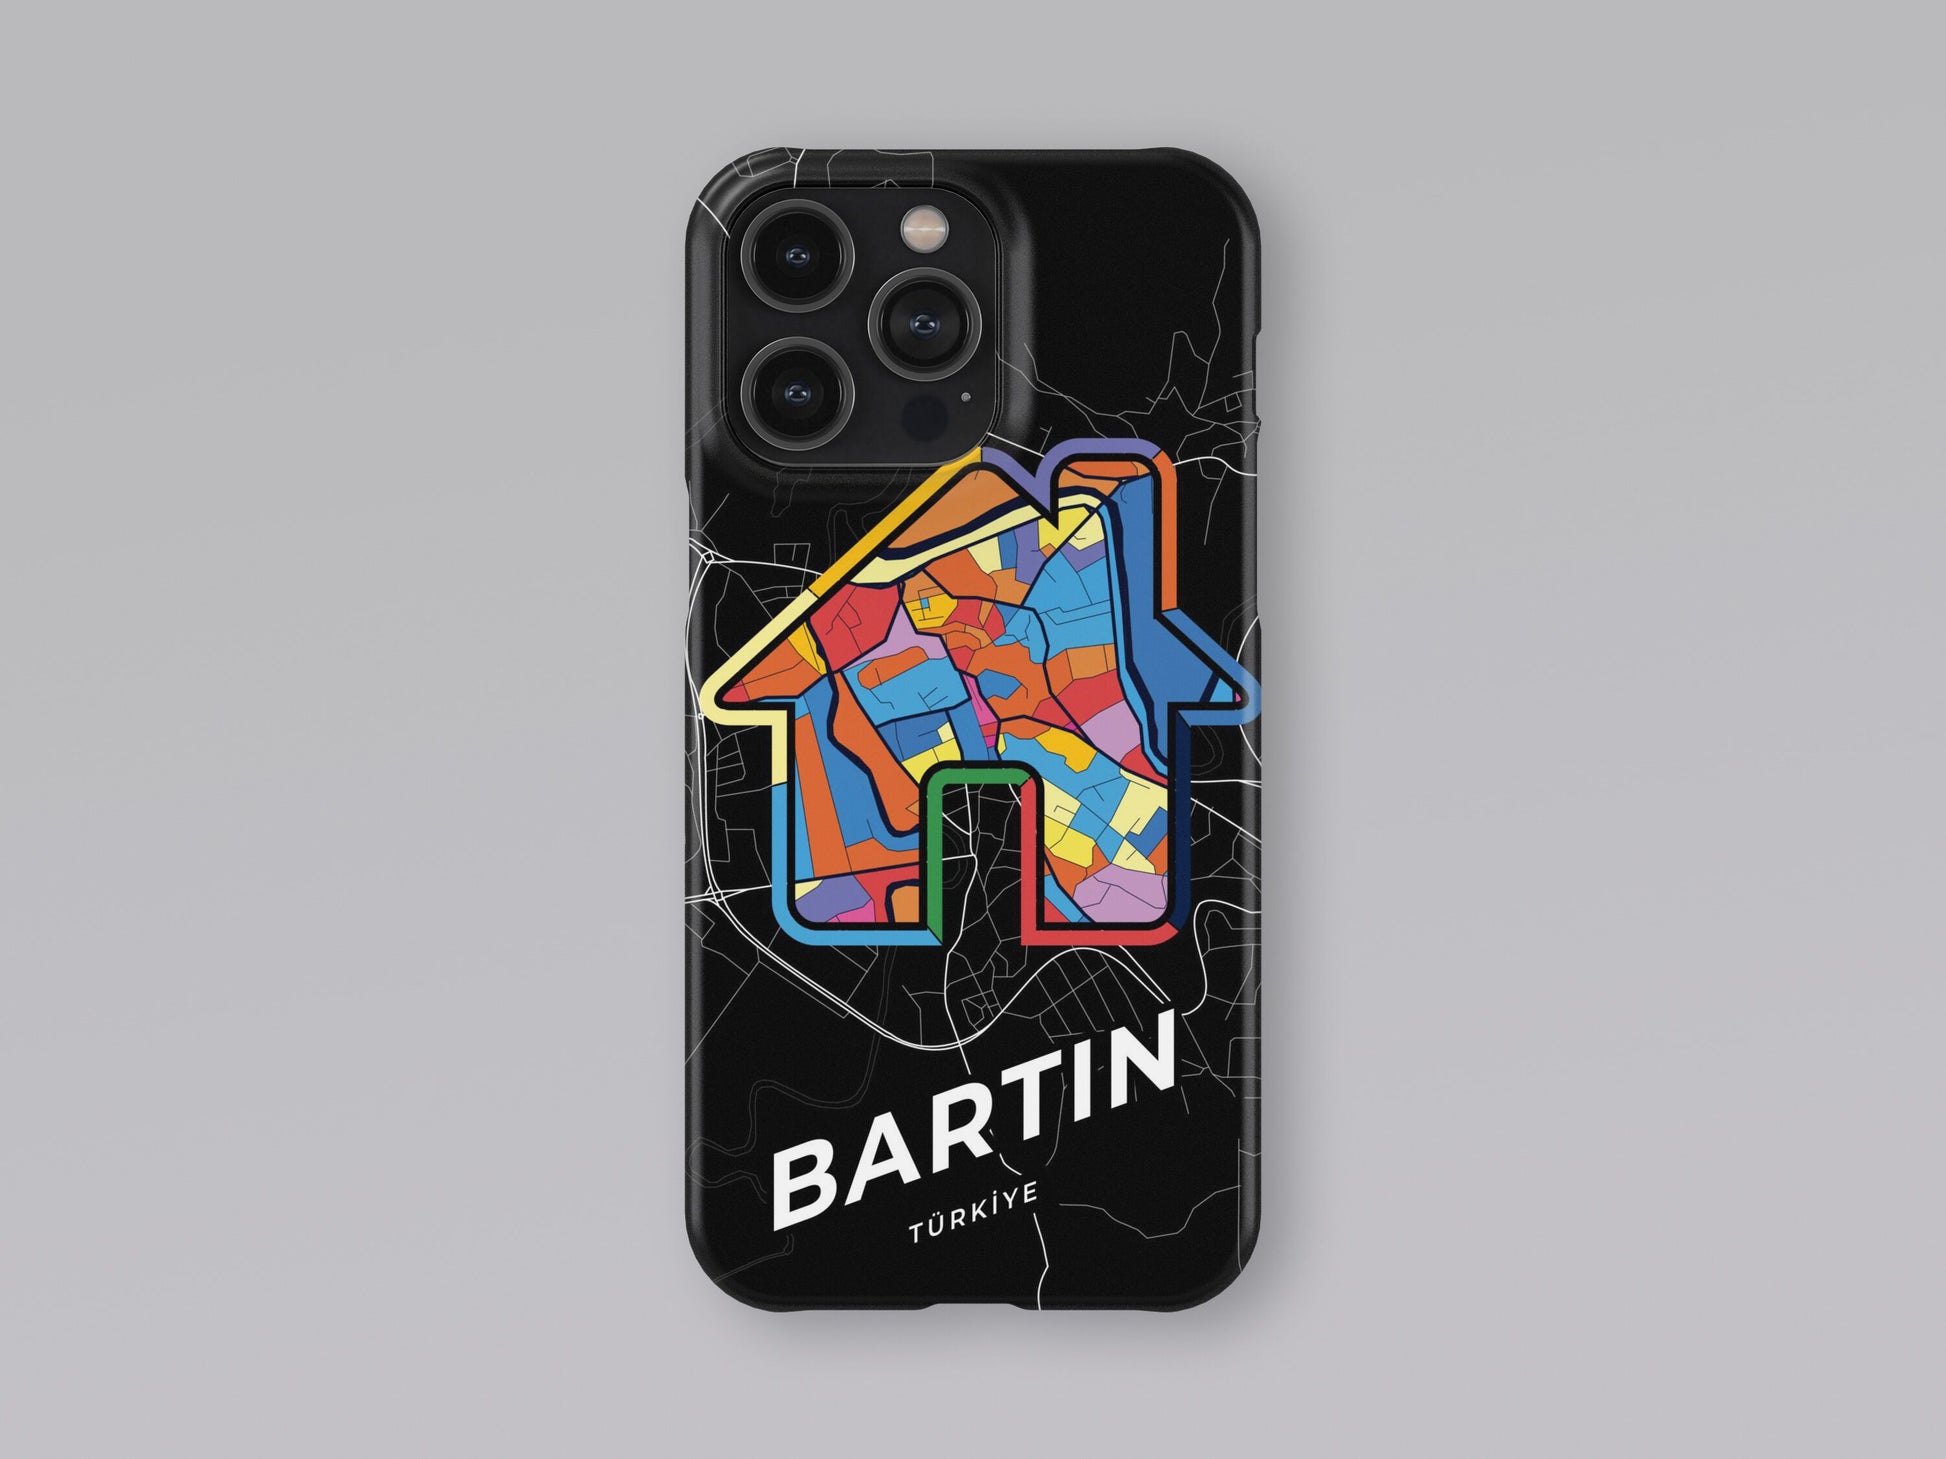 Bartın Turkey slim phone case with colorful icon. Birthday, wedding or housewarming gift. Couple match cases. 3